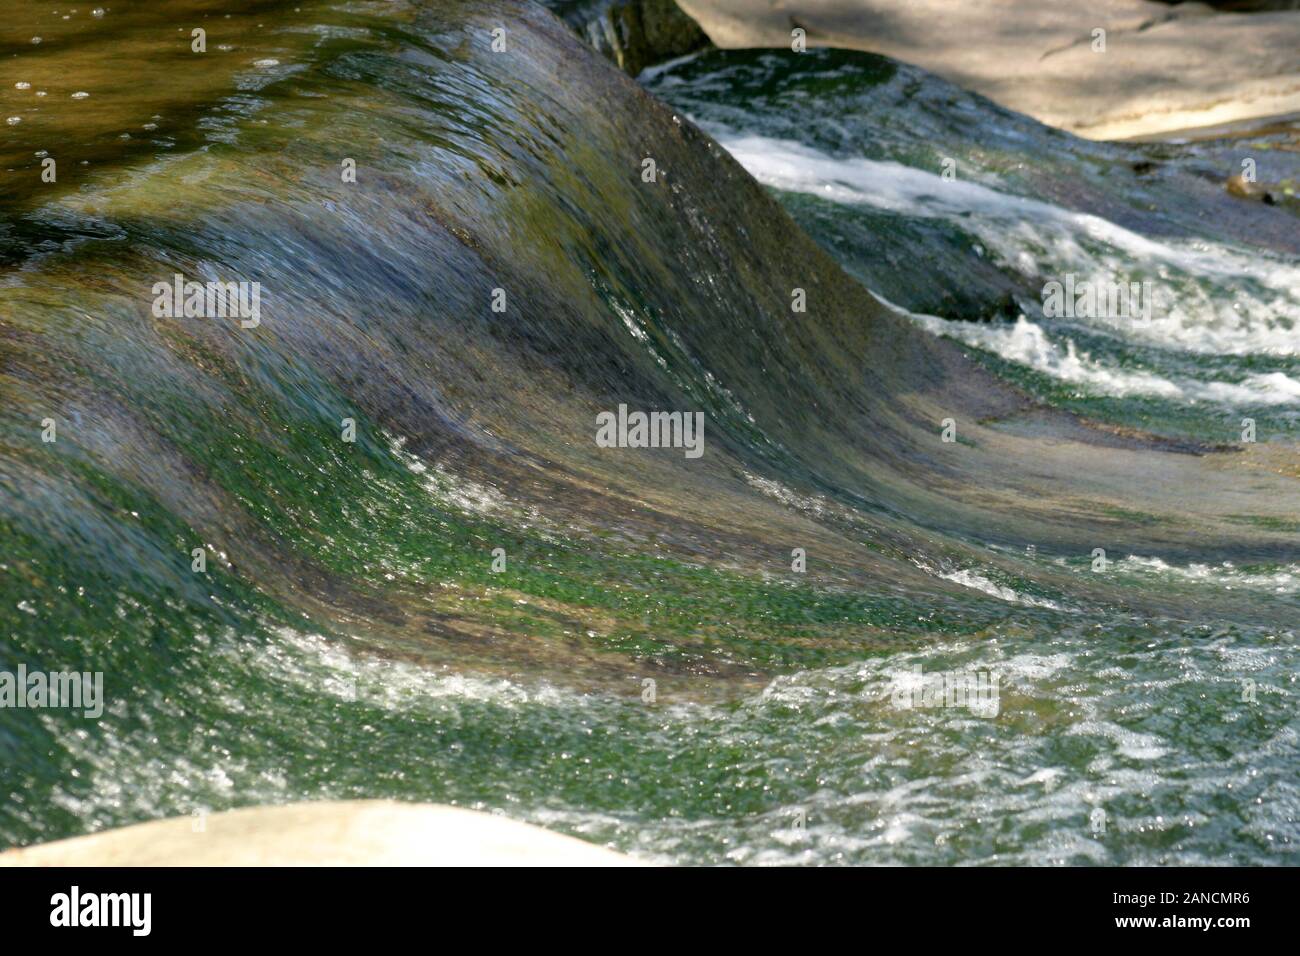 The Rocky River, in Olmsted Falls, Ohio, USA. Detail of waters flowing down smoothly. Stock Photo